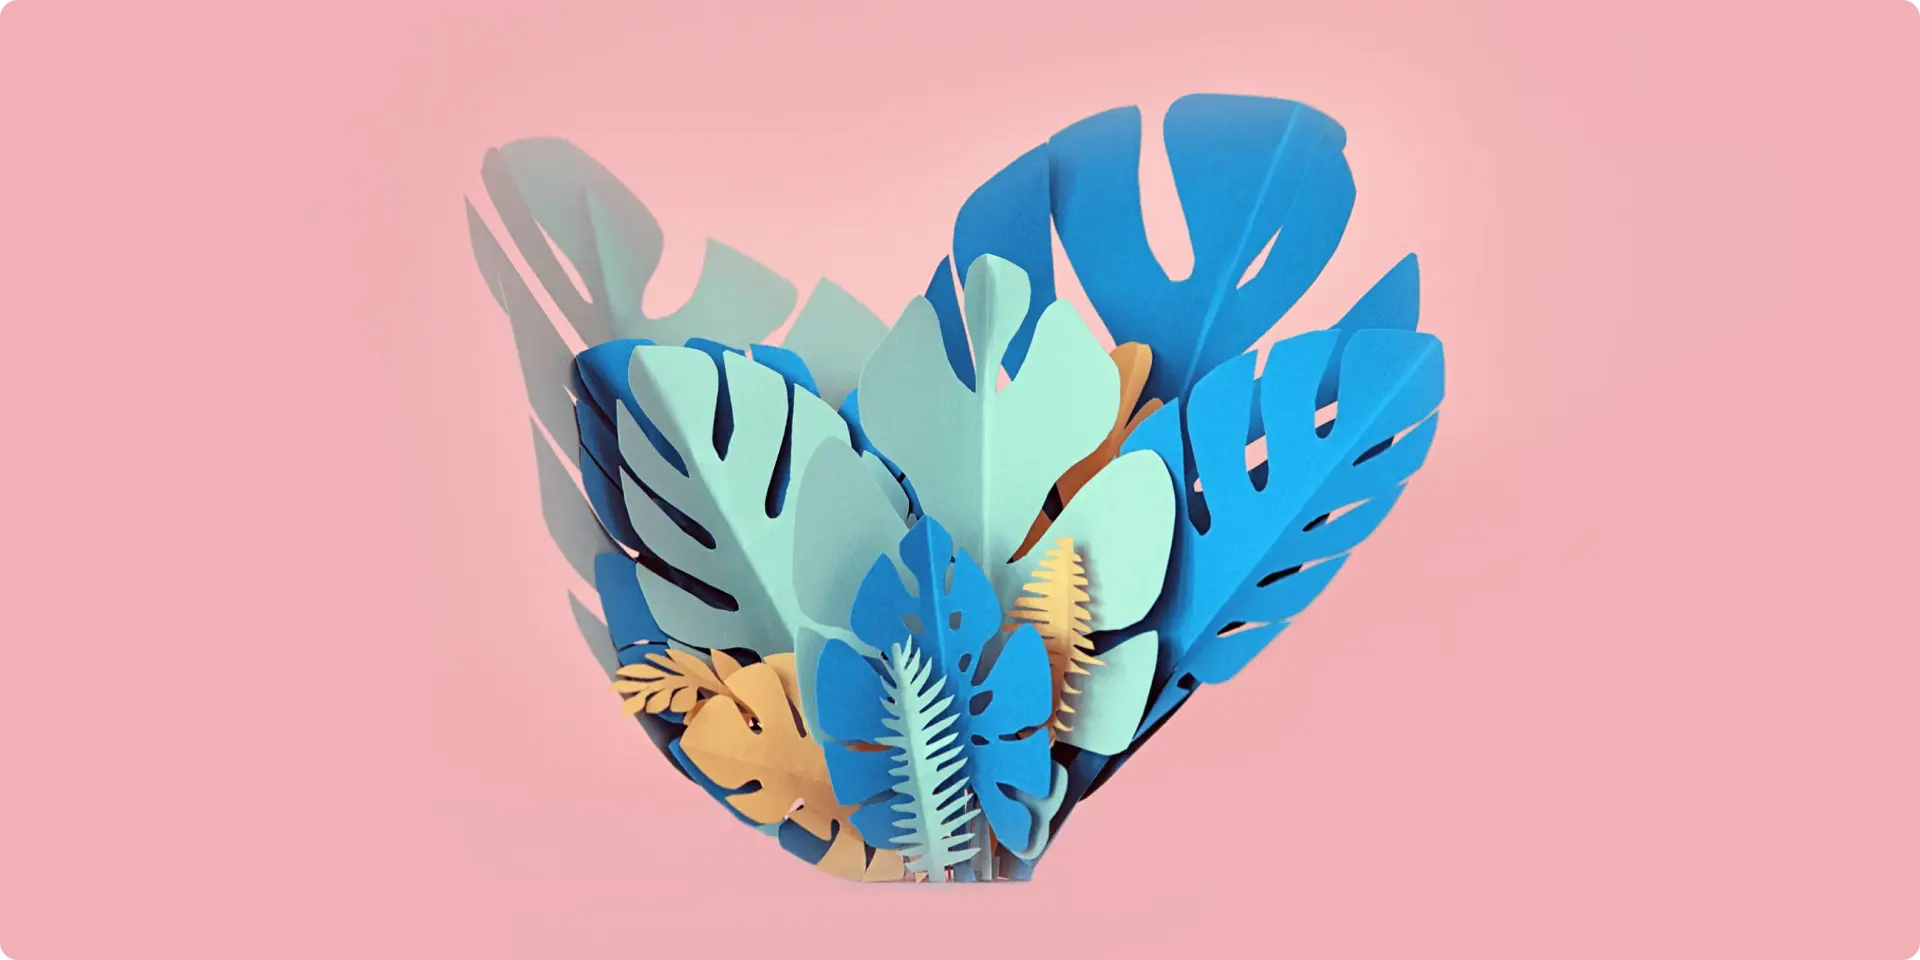 Decorative element with monstera leaves in shades of blue, burnt orange, and teal, set on a light pink background. 